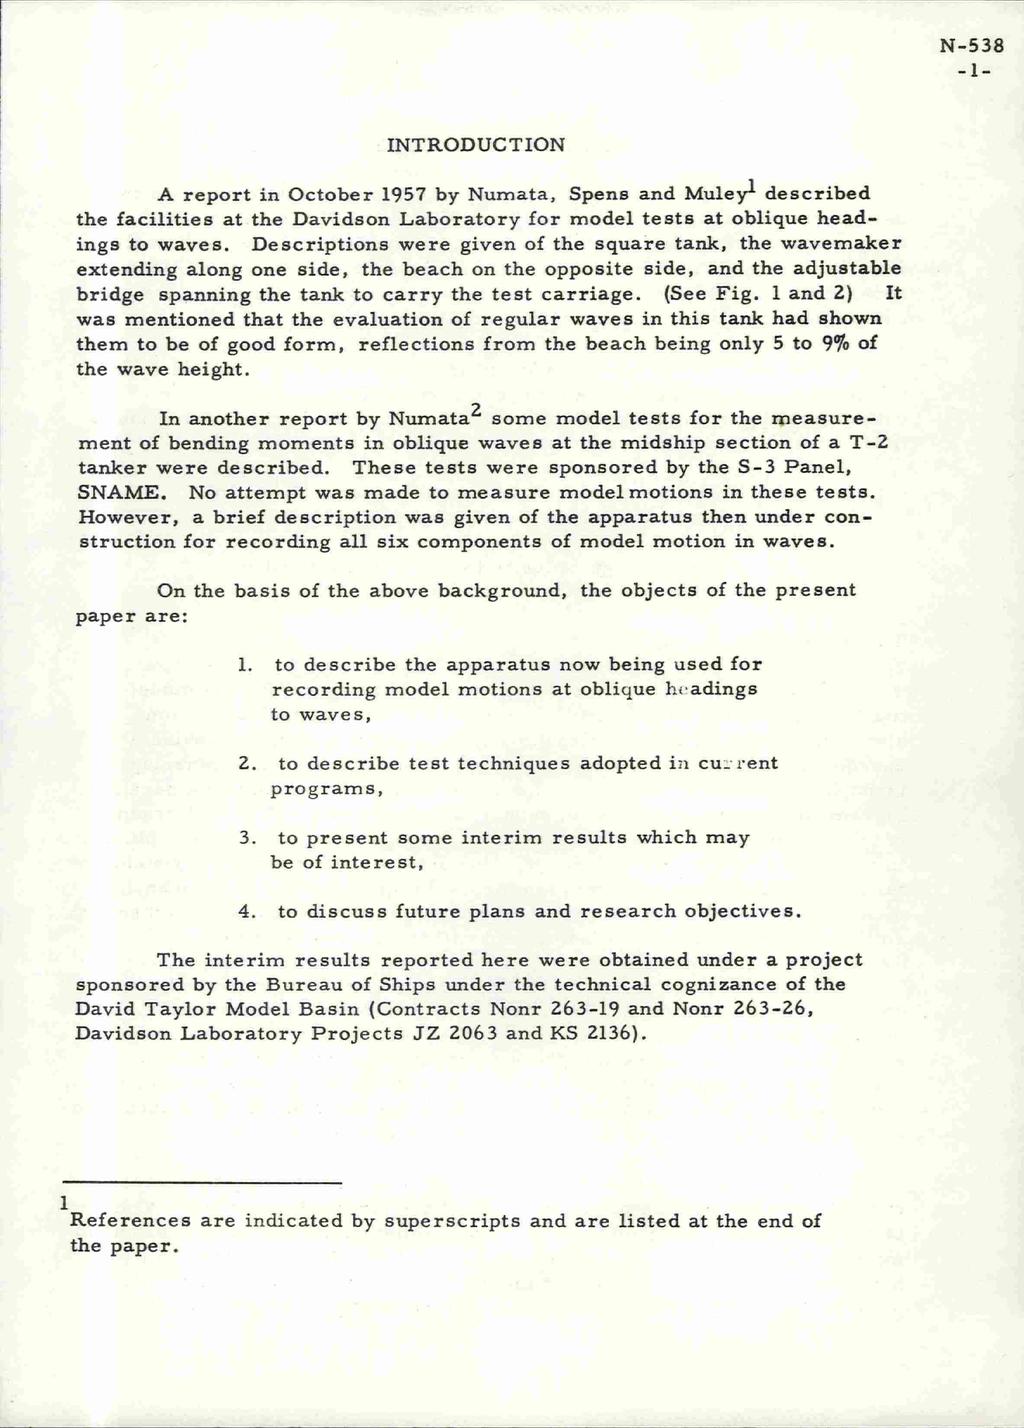 N-538-1- INTRODUCTION A report in October 1957 by Numata, Spens and Muley]. described the facilities at the Davidson Laboratory for model tests at oblique headings to waves.